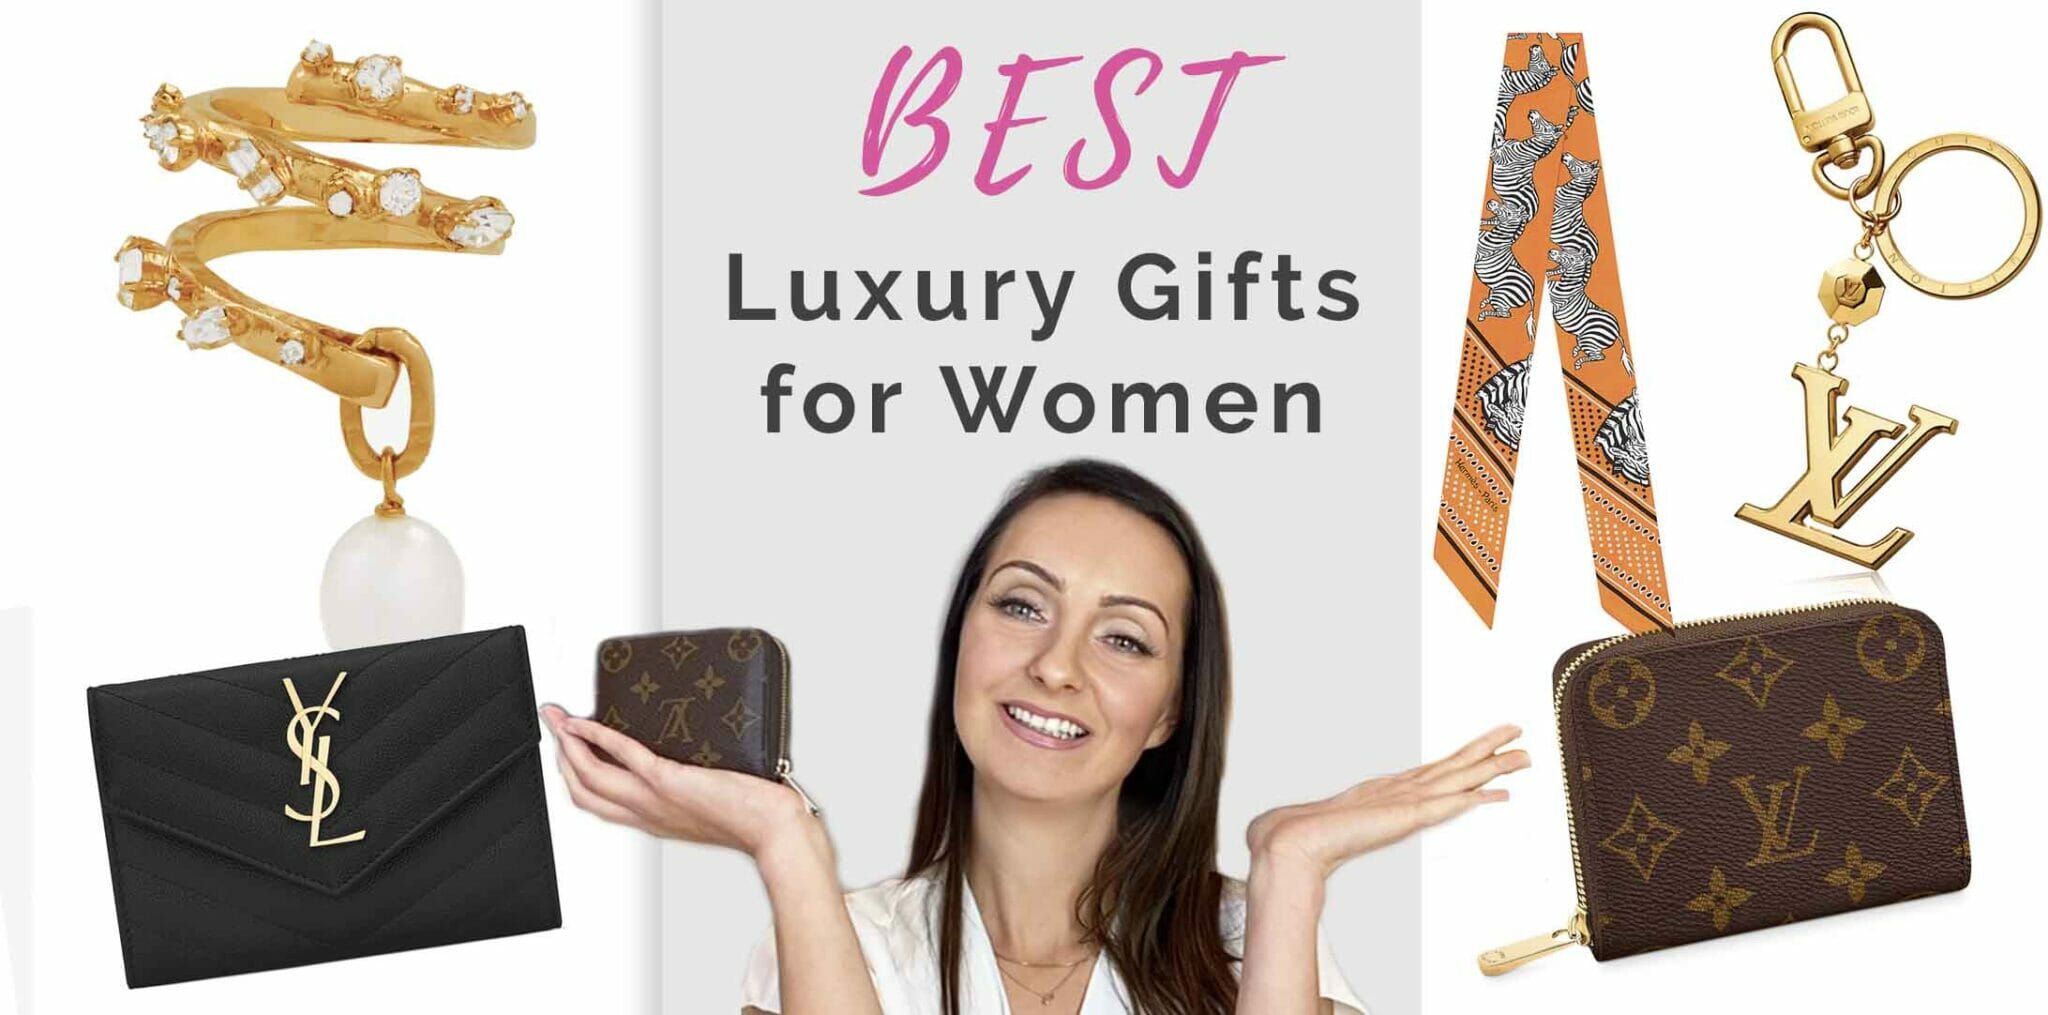 THE BEST LIST OF AFFORDABLE LUXURY DESIGNER GIFTS